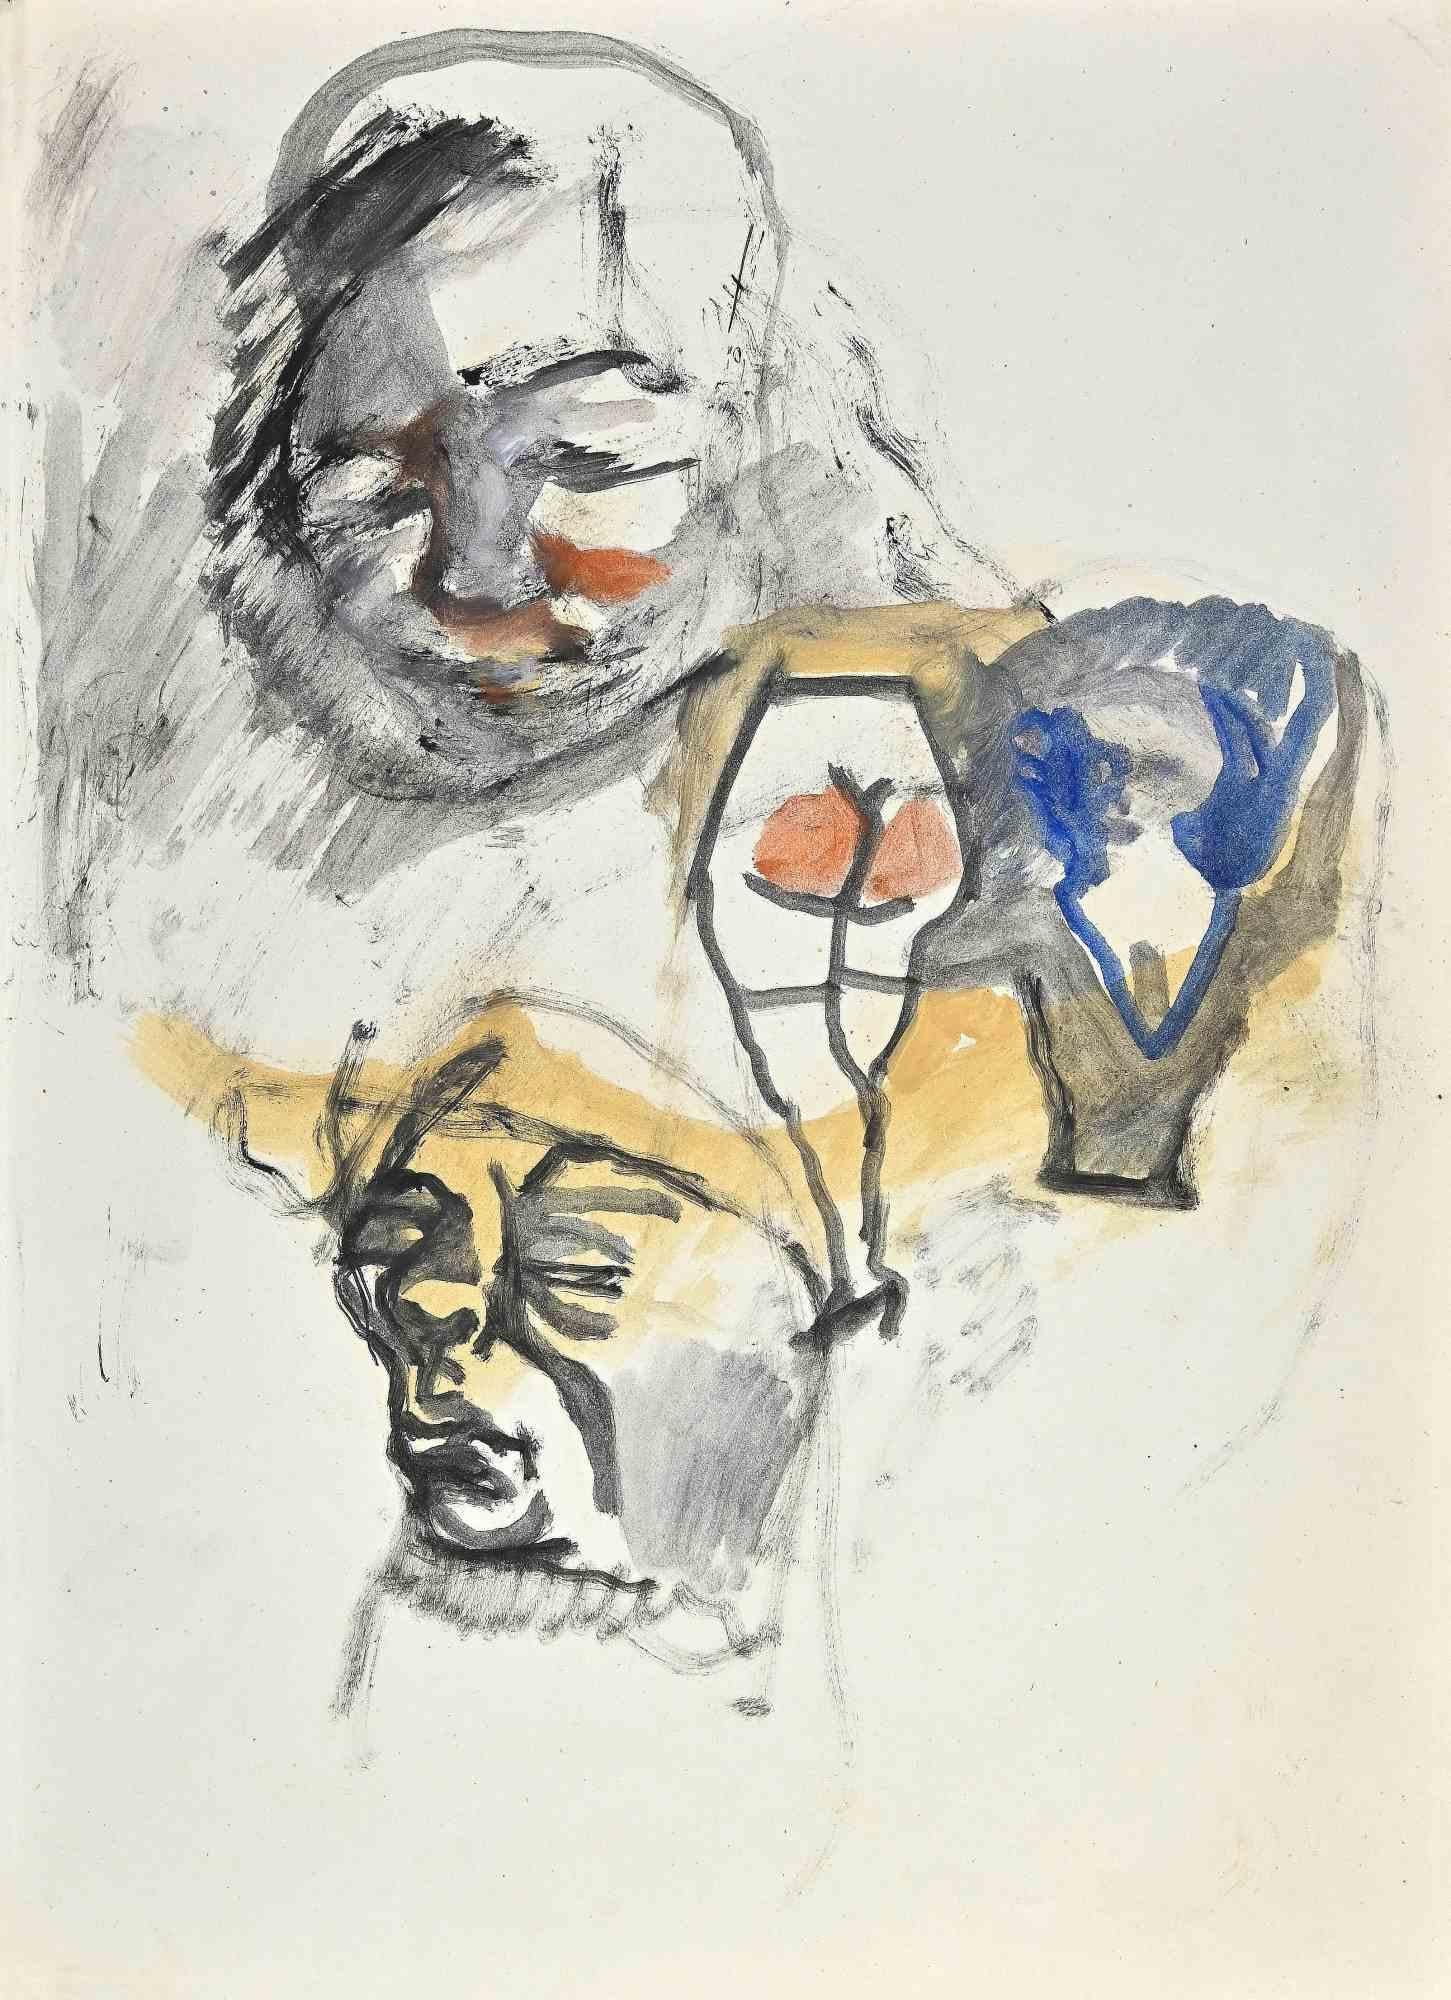 The Faces  - Drawing by Mino Maccari - Mid-20th Century